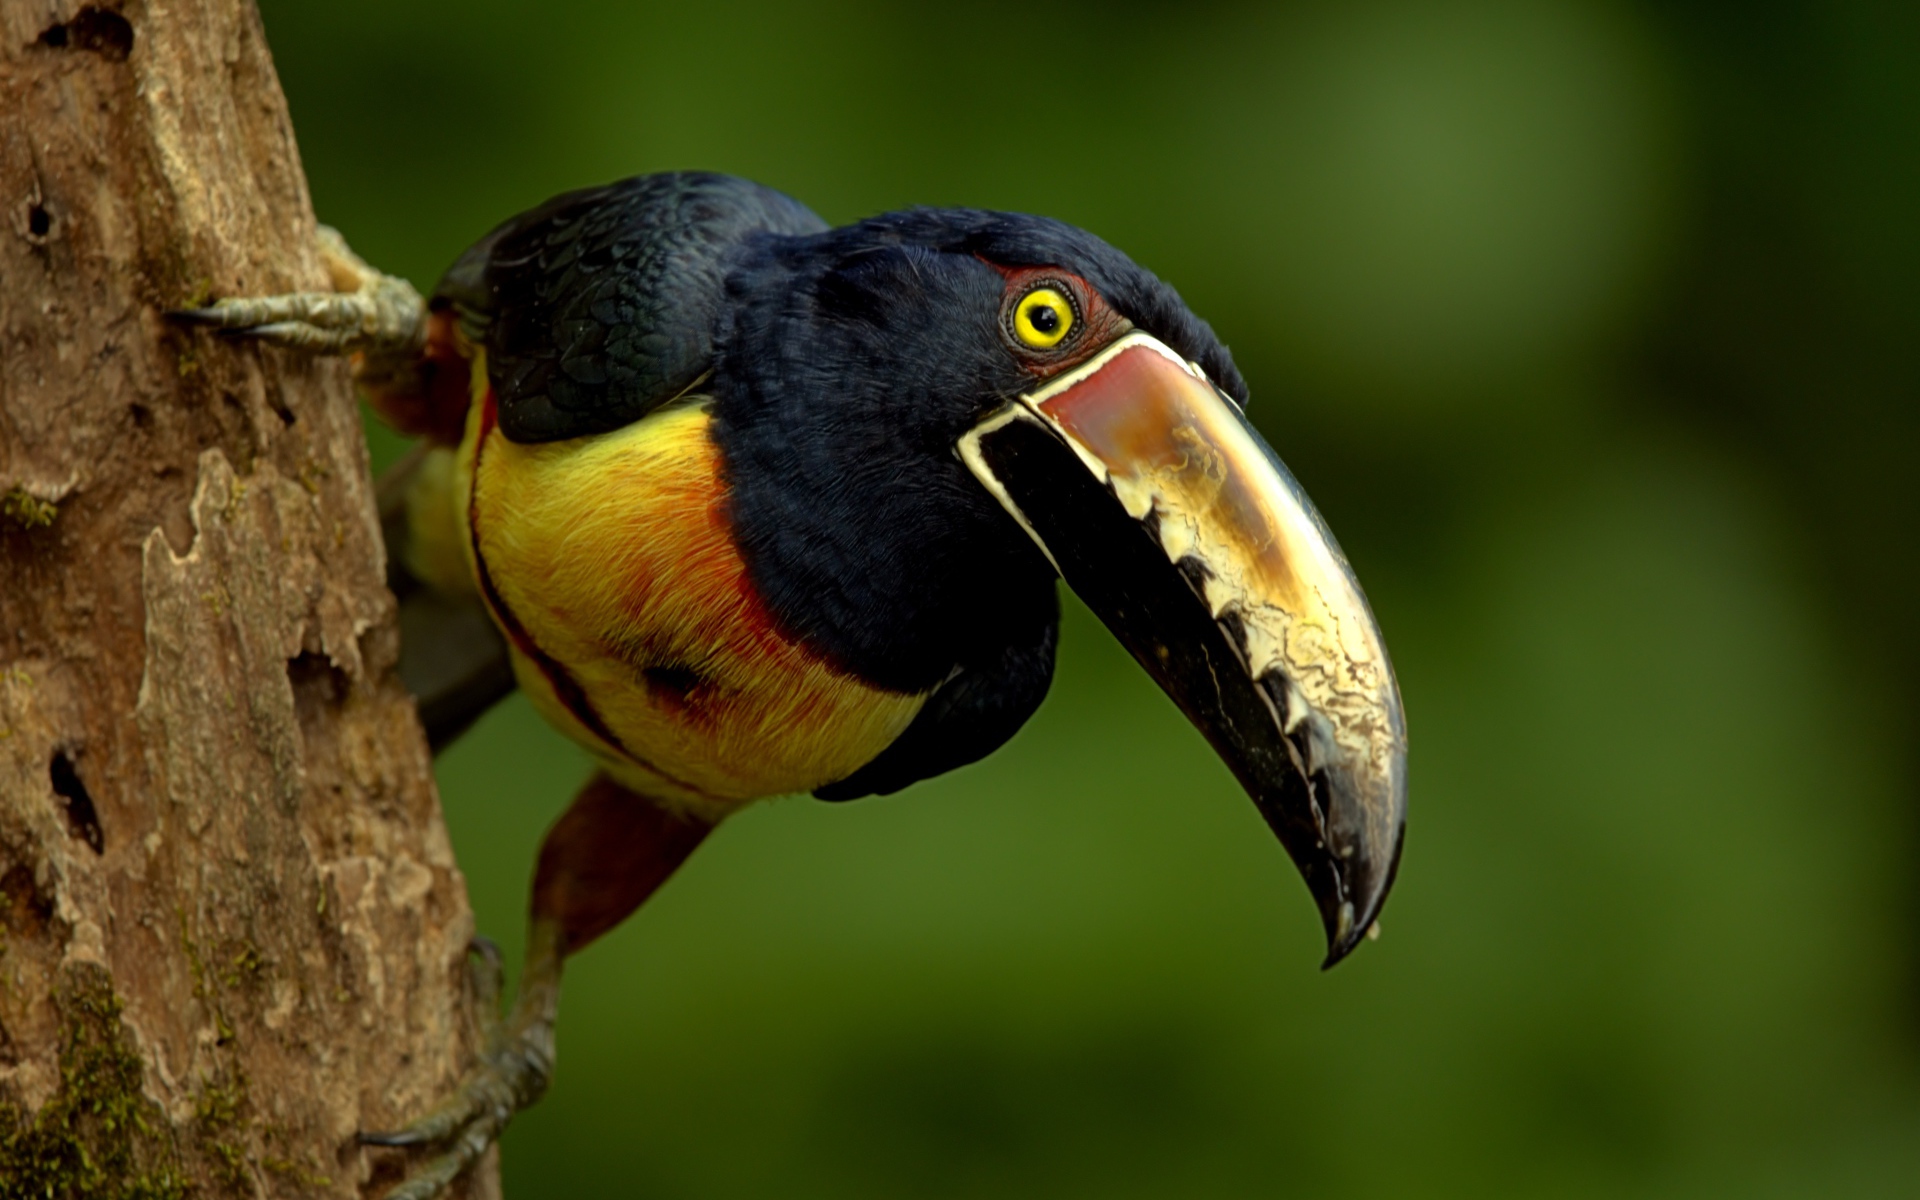 A toucan bird with a large beak sits on a tree